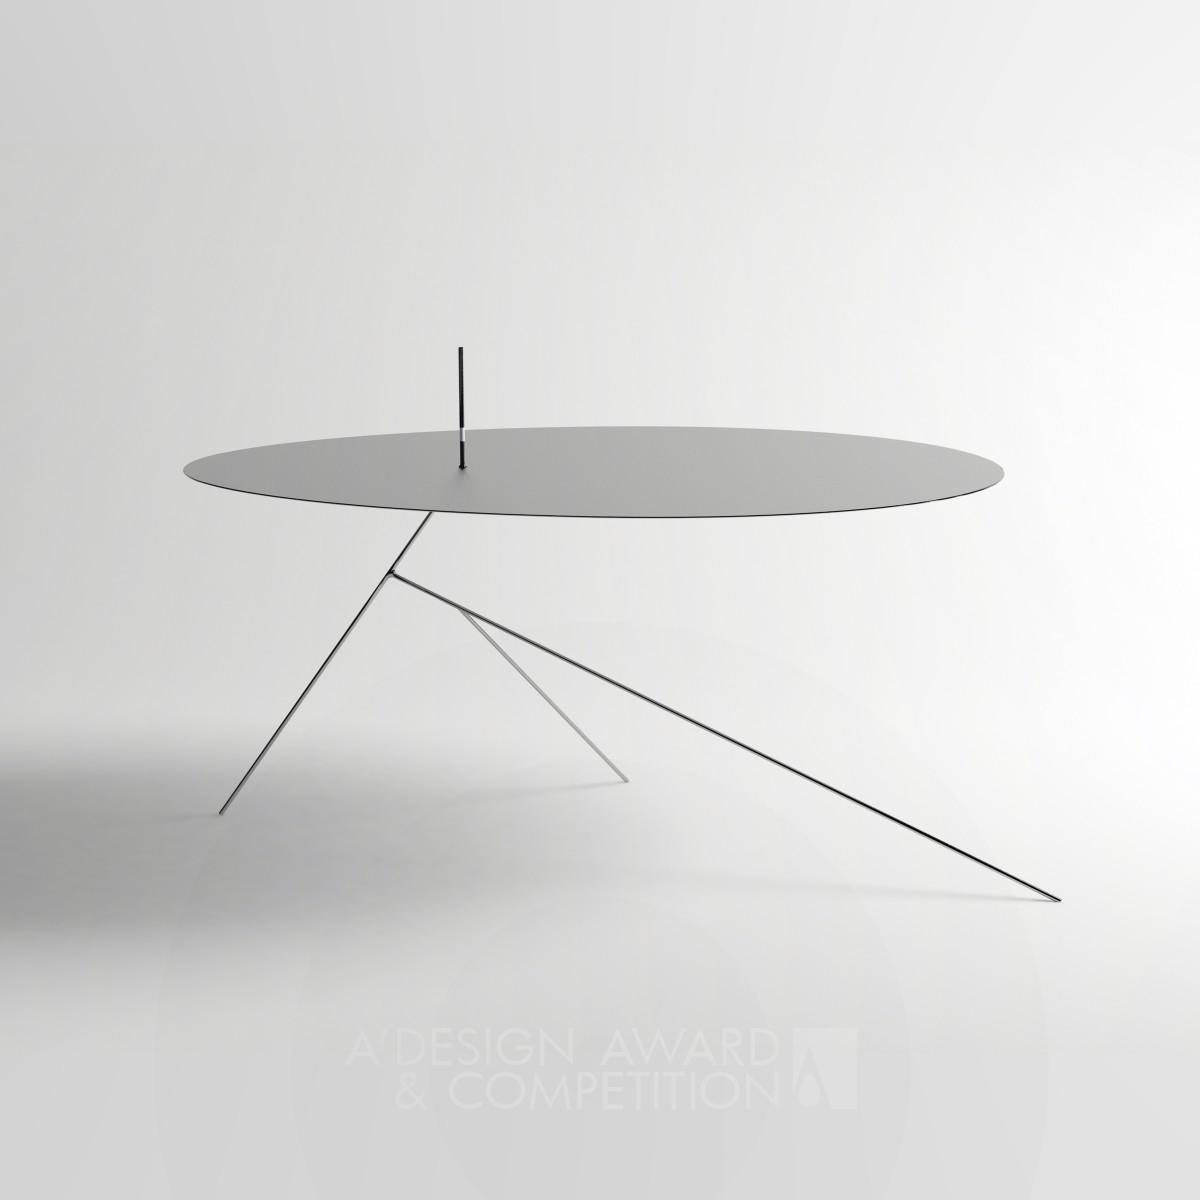 Chieut Table